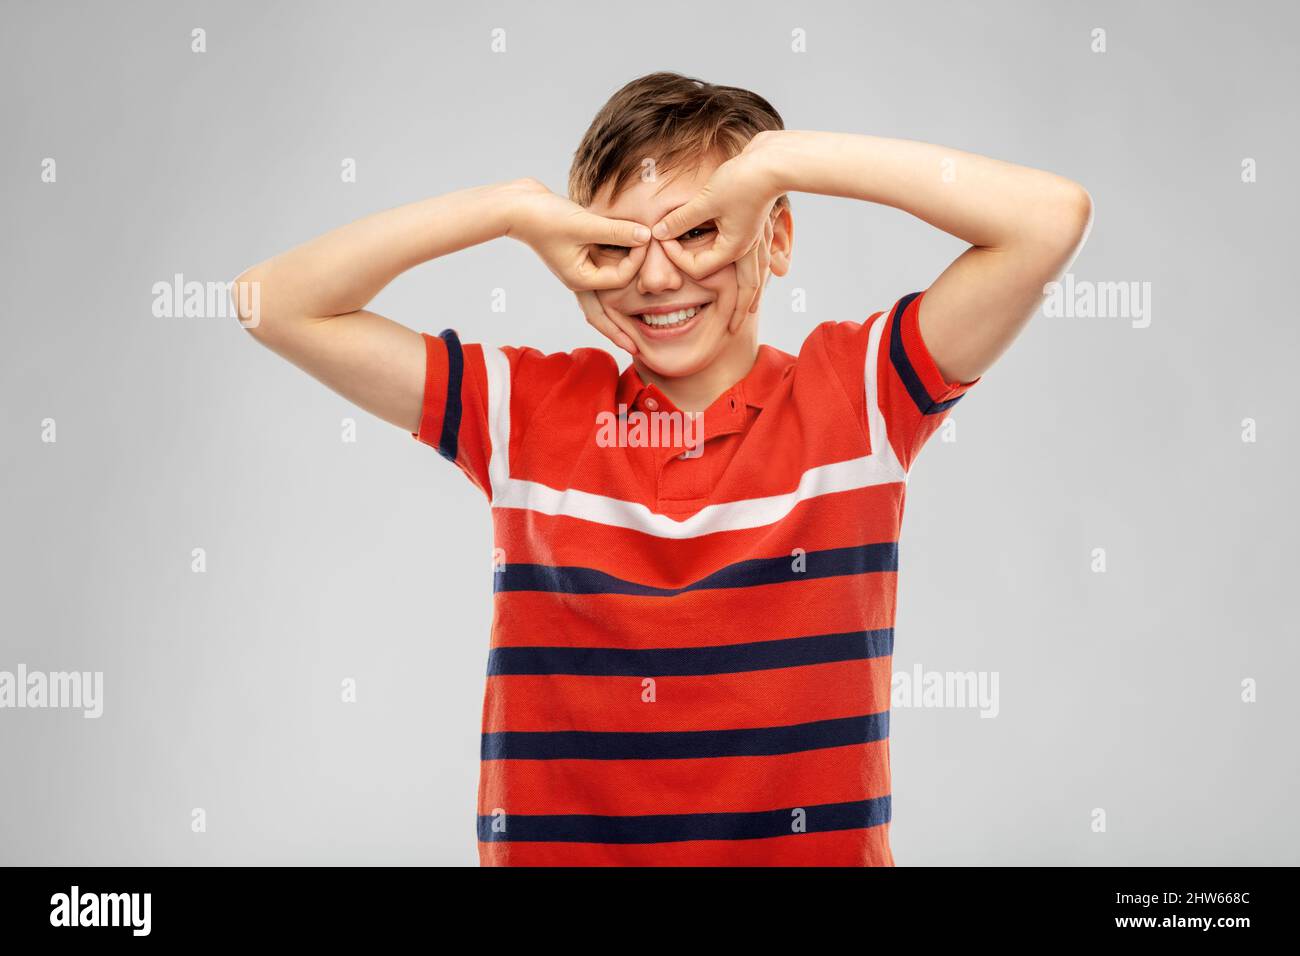 happy smiling boy looking through finger glasses Stock Photo